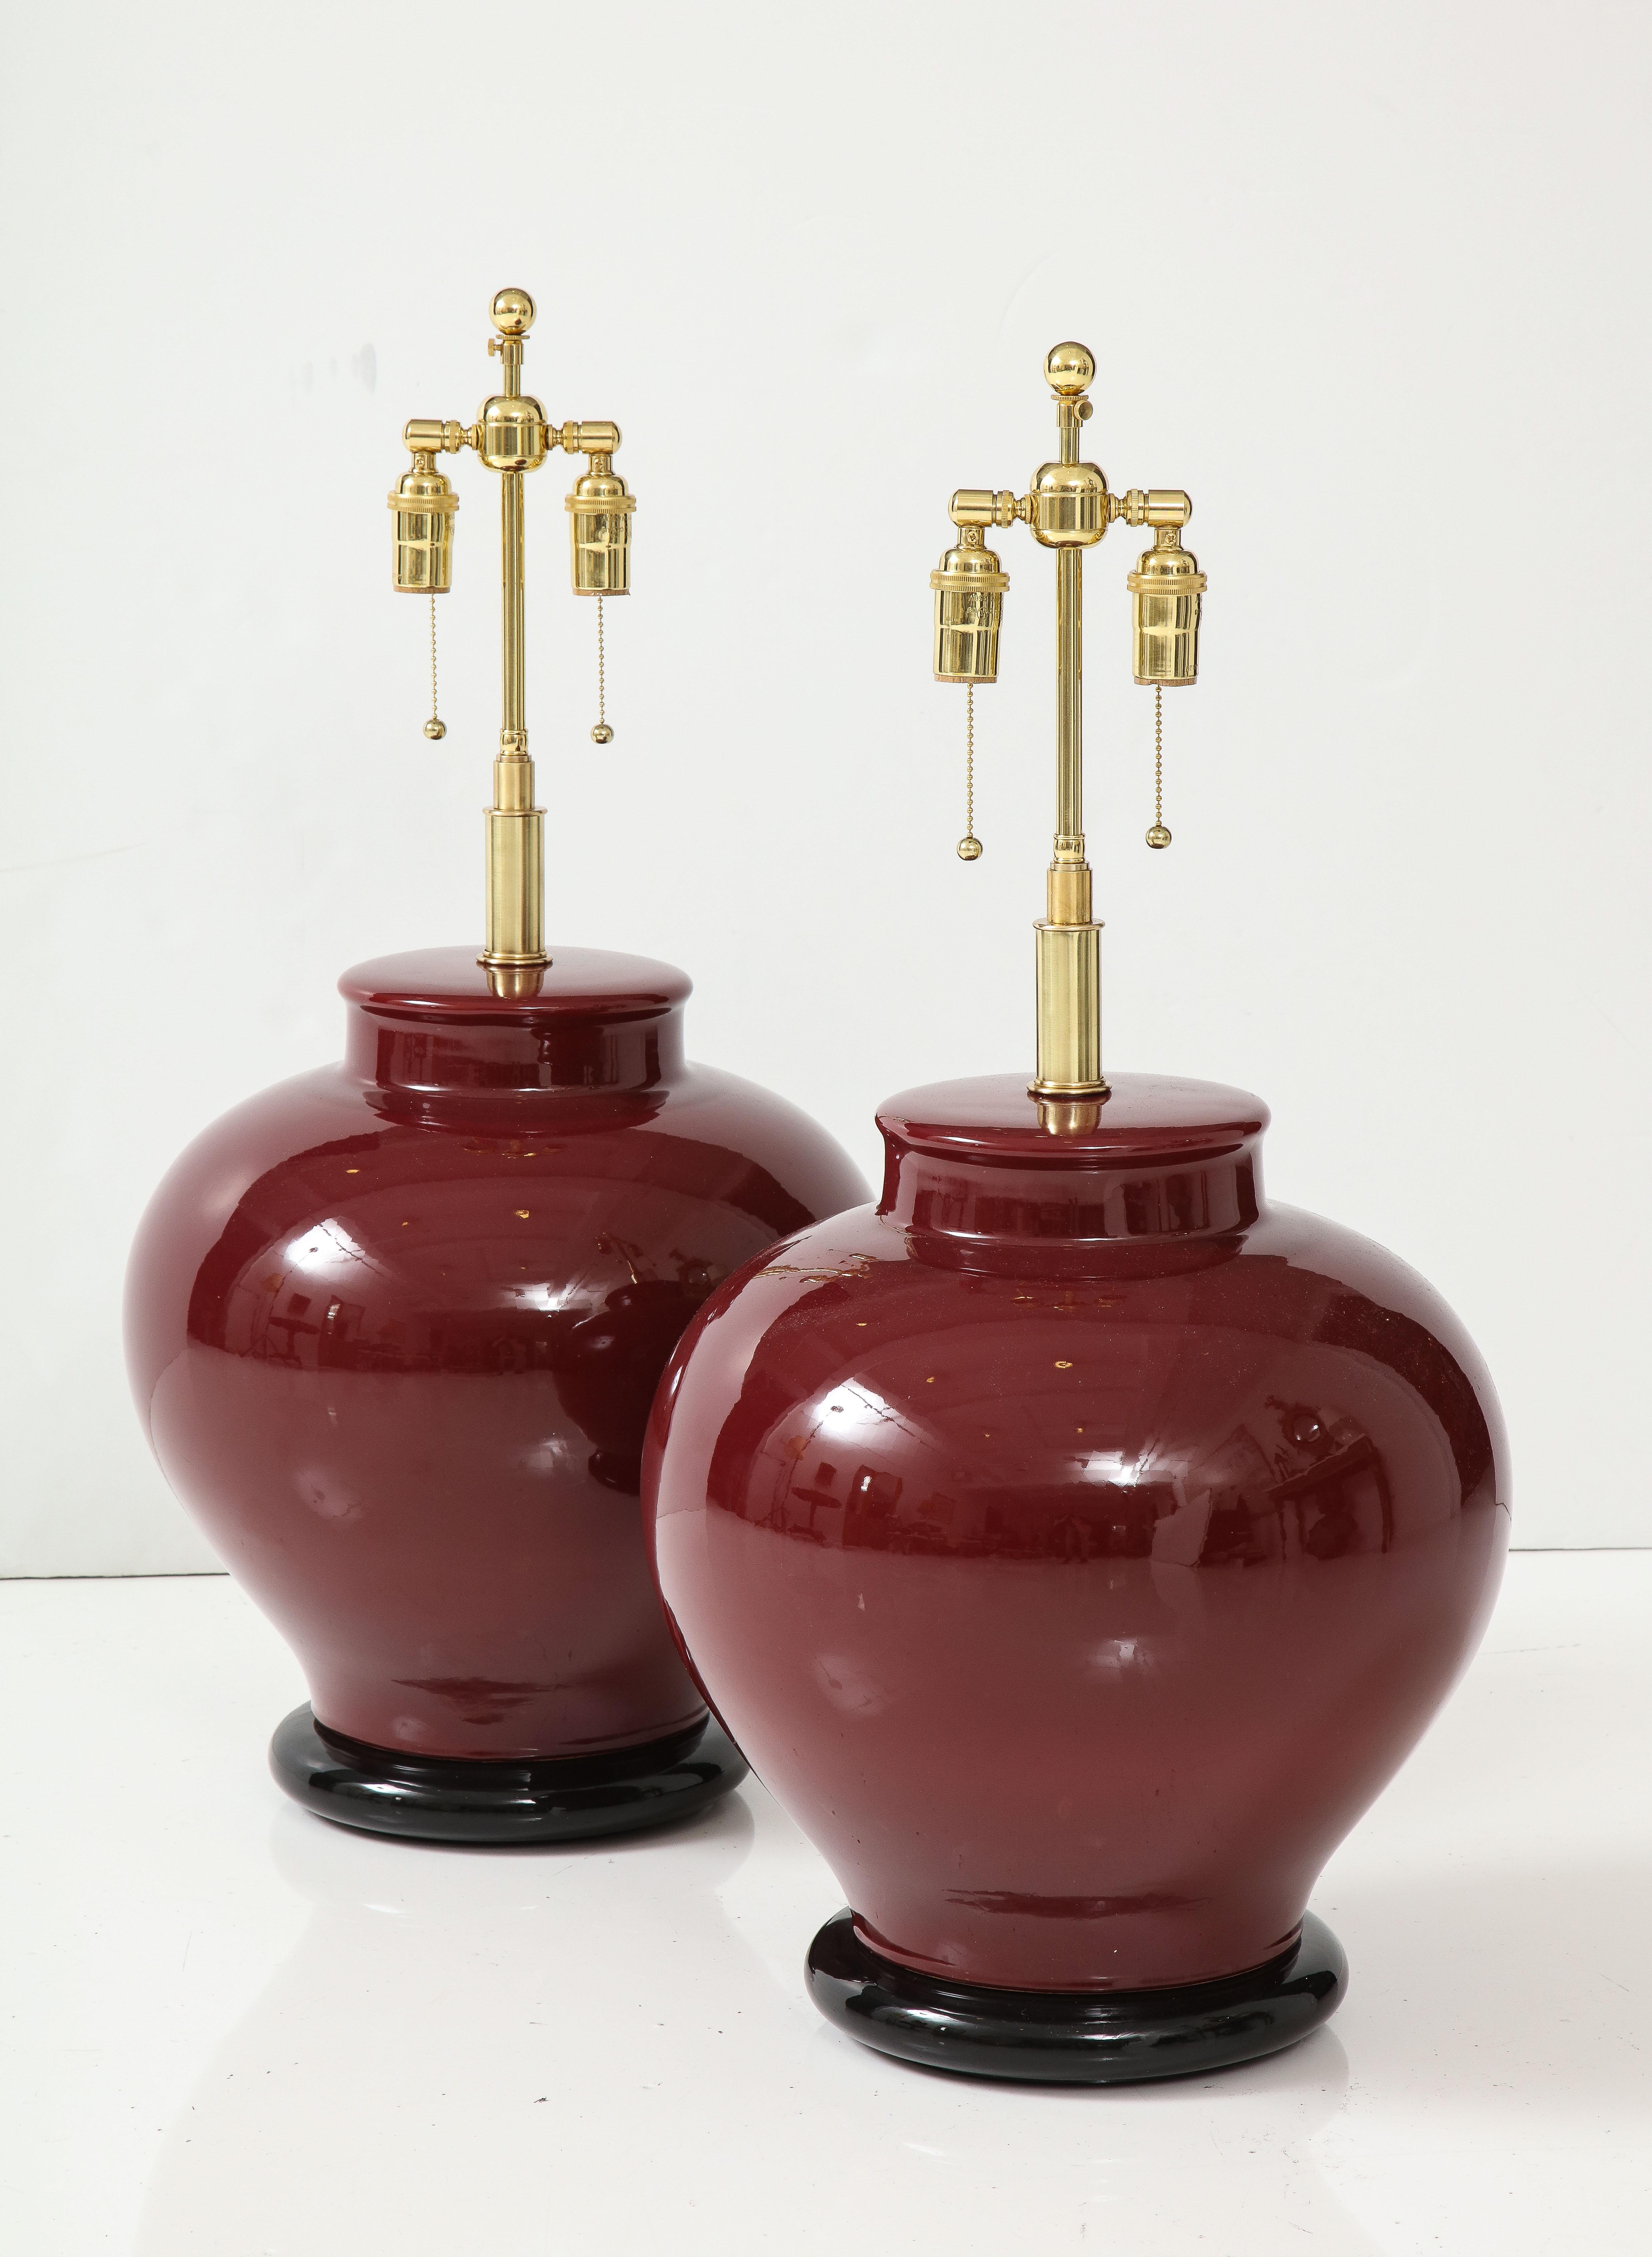 Pair of large ceramic lamps with a Rich Burgundy glaze finish.
The lamps are mounted on Black lacquered bases and have been Newly rewired with adjustable polished brass double clusters that take standard size light bulbs and silk rayon cords.
The